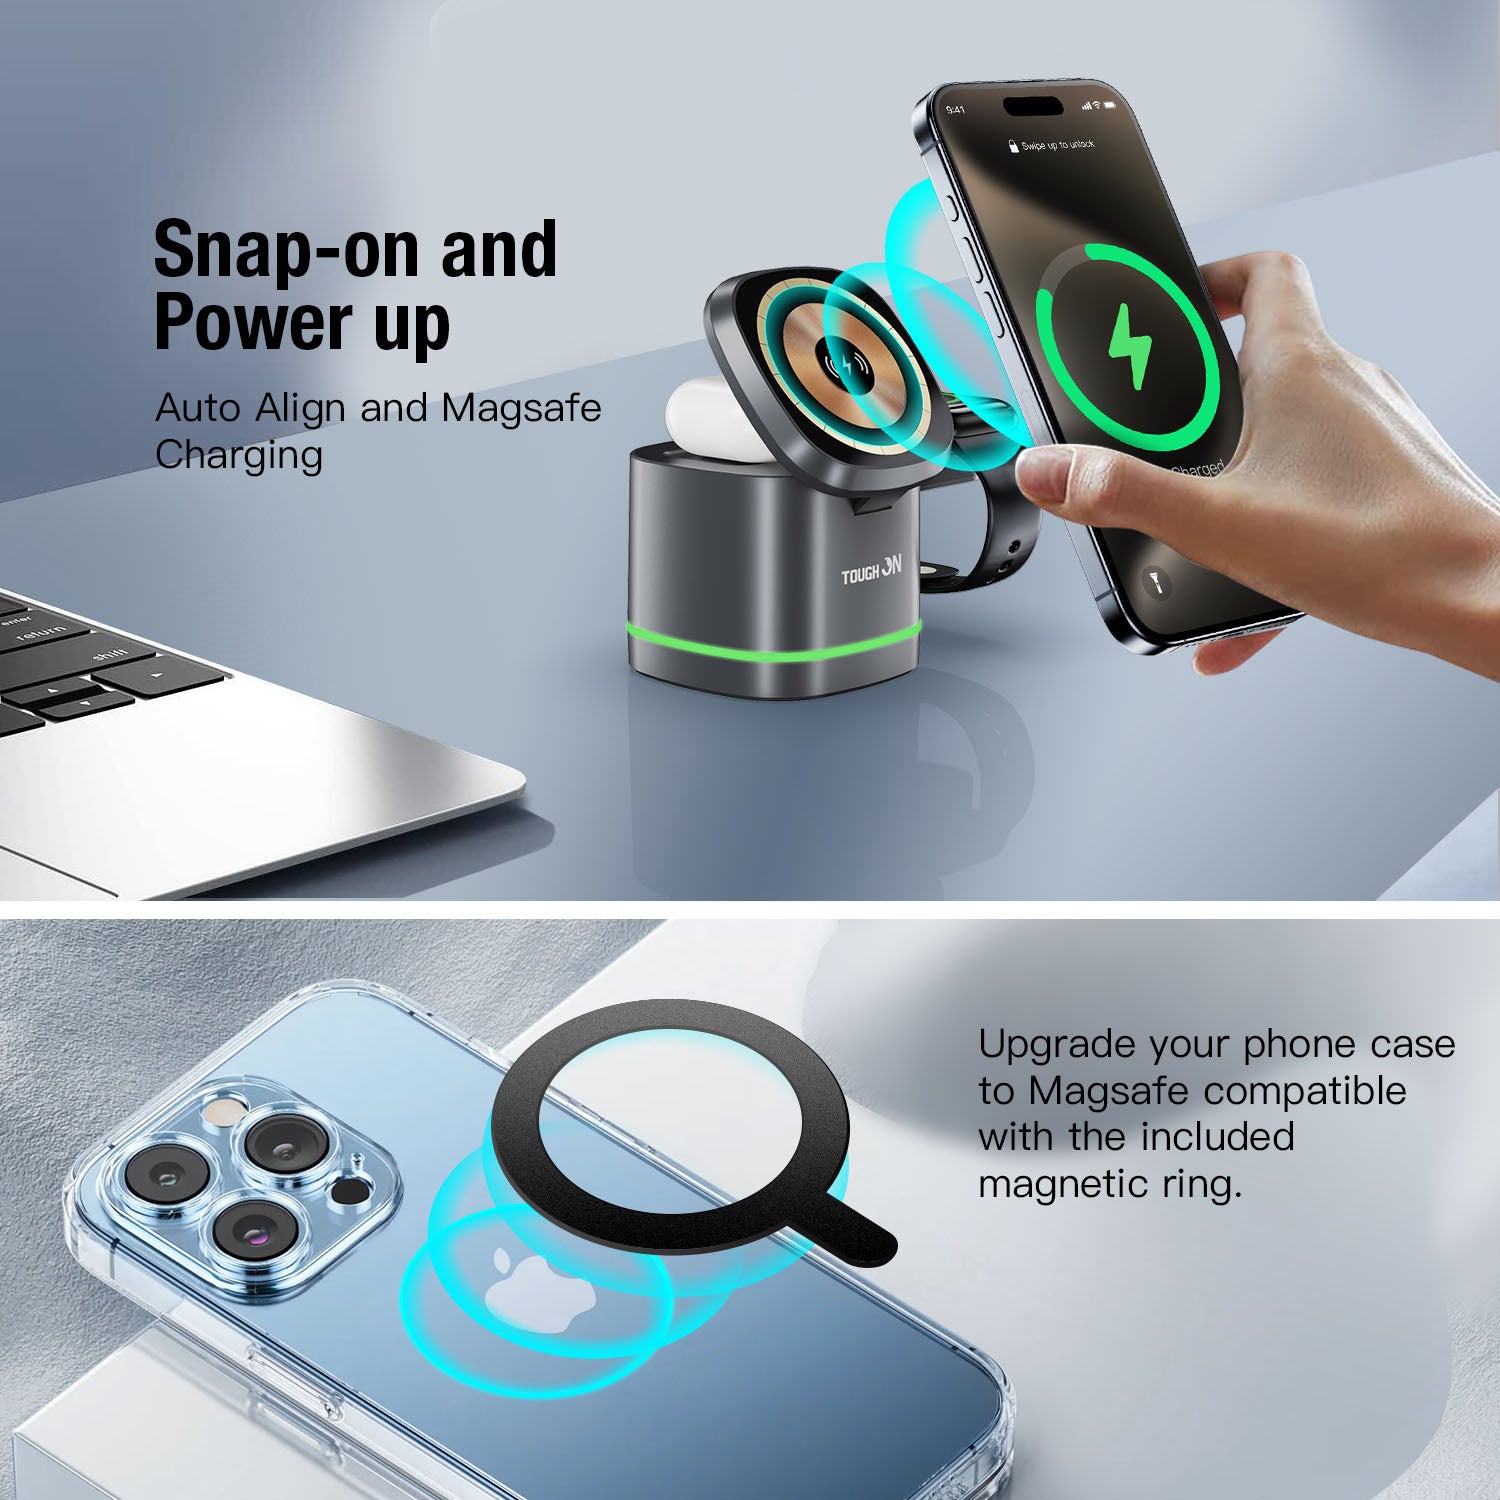 Tough On 3 in 1 Wireless Charger Cube with Magsafe